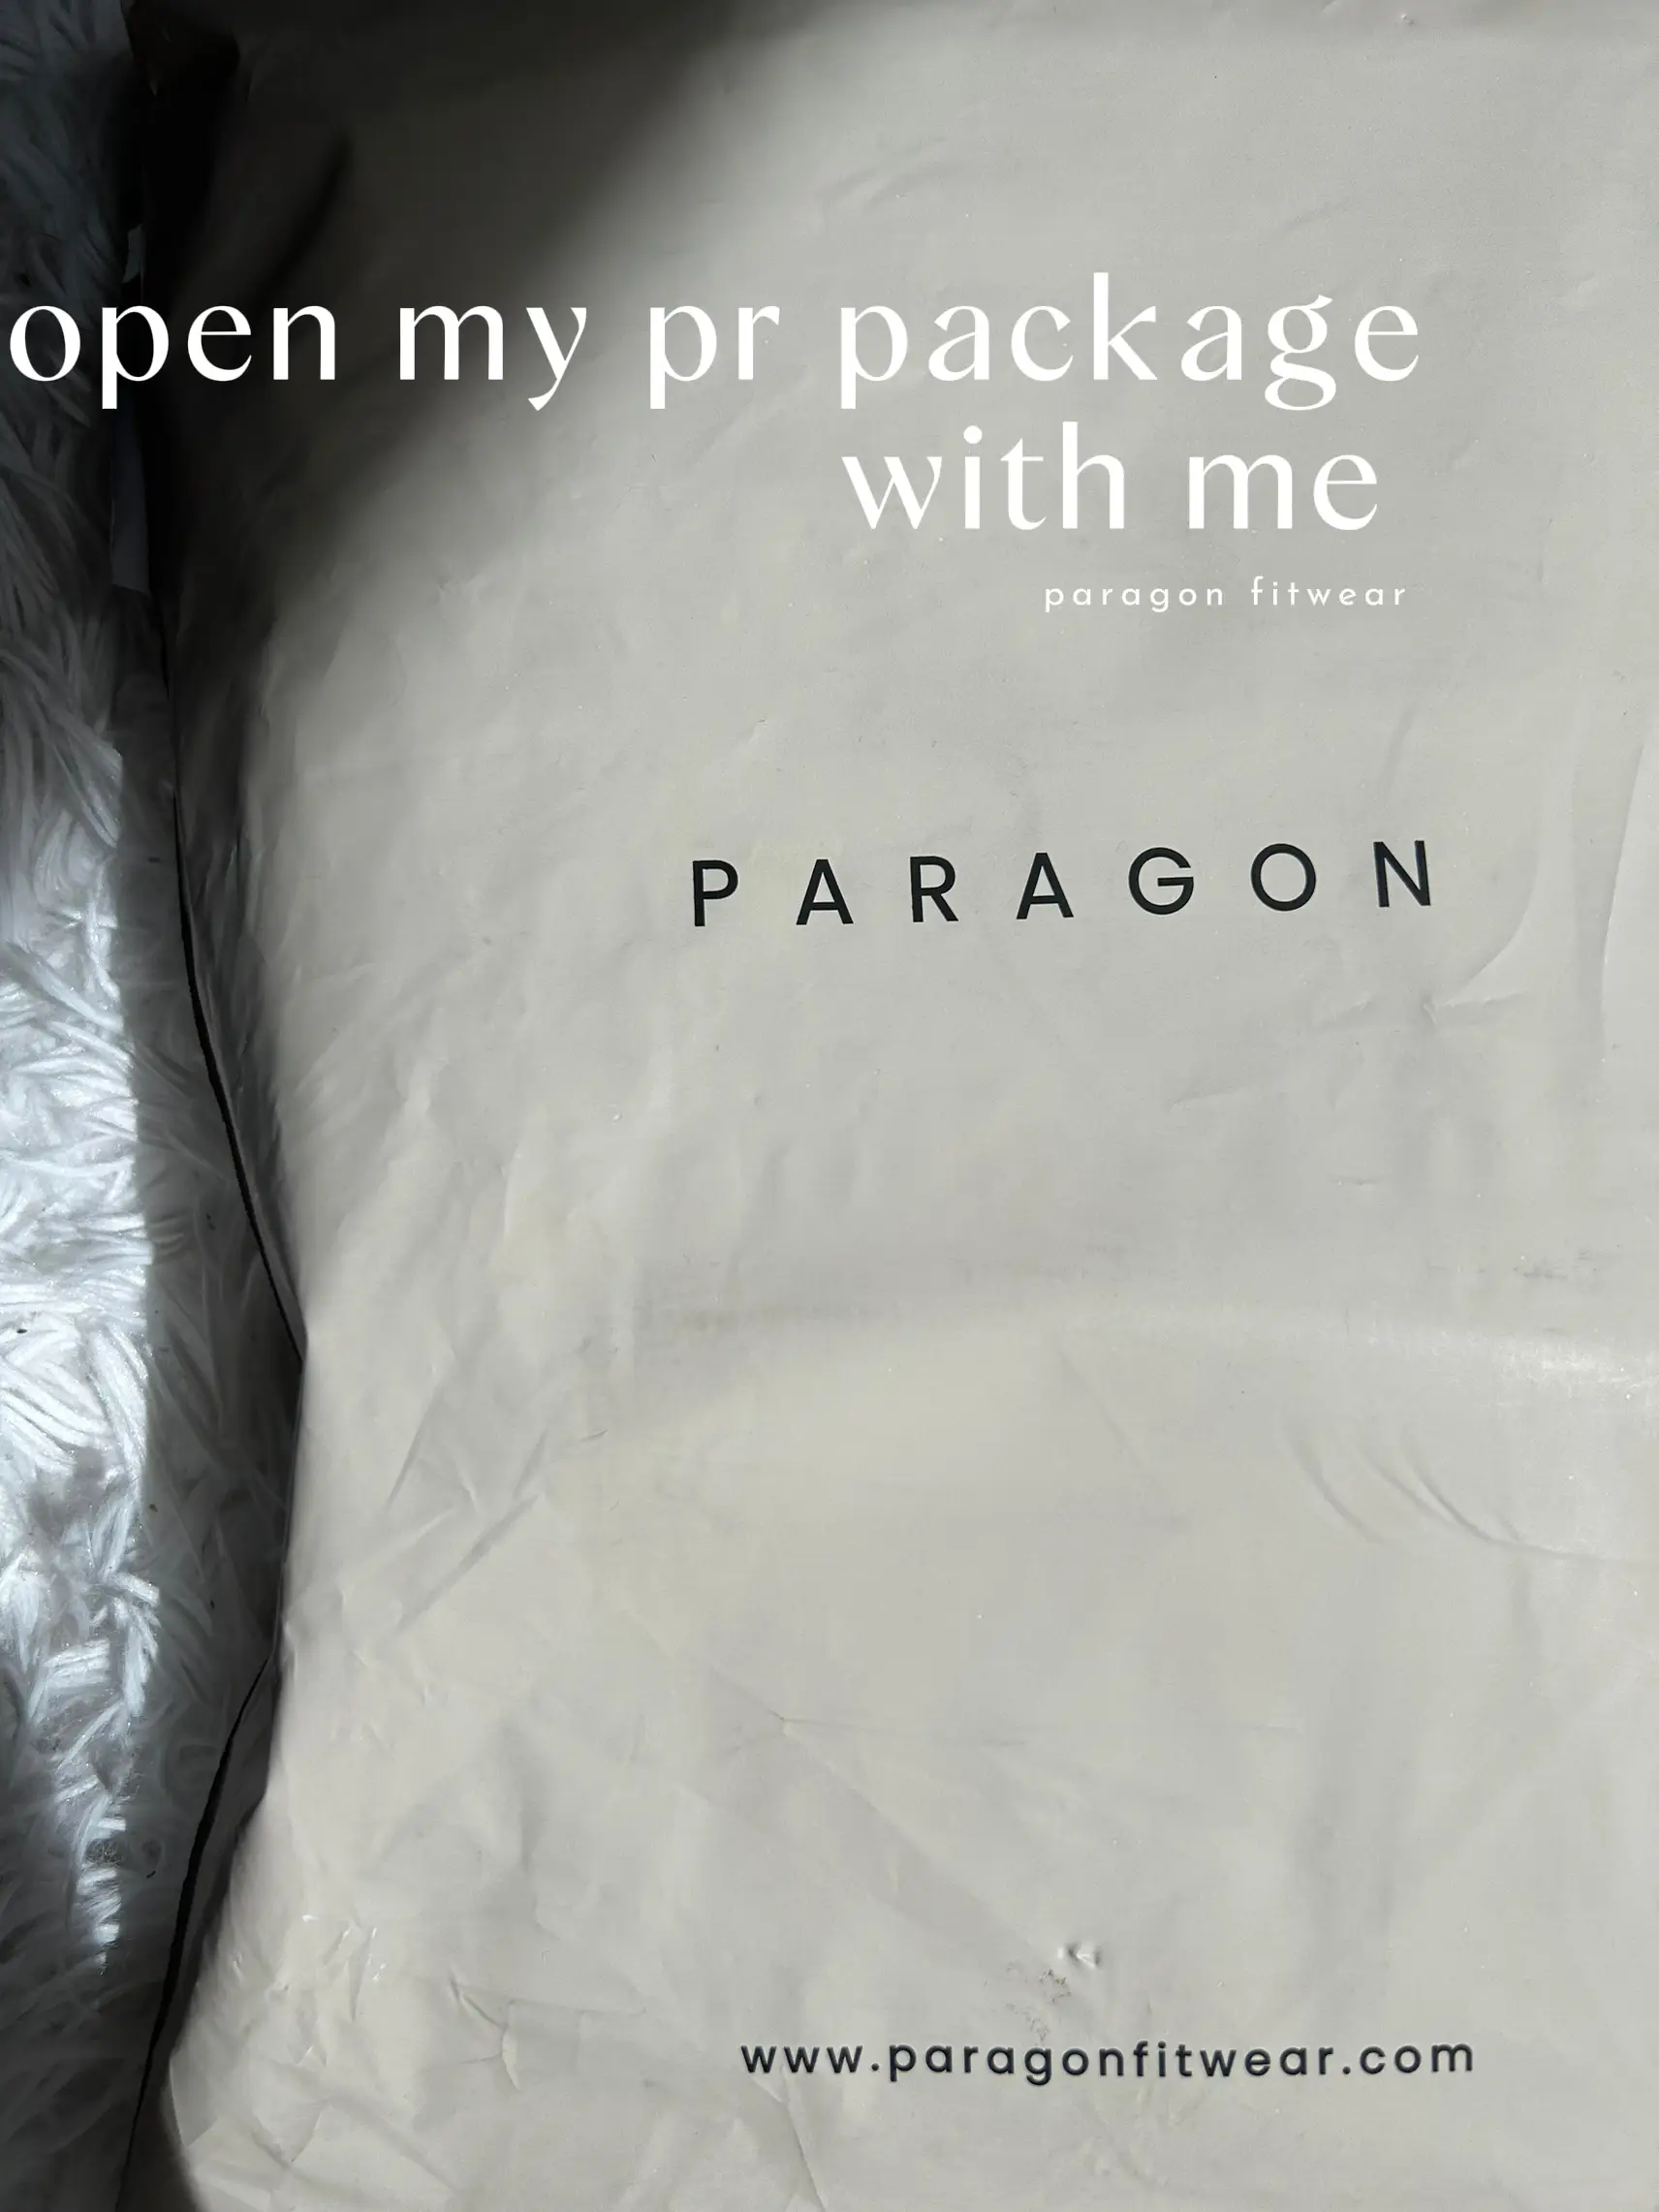 Paragon Fitwear - // WE'VE OFFICIALLY LAUNCHED! It's been a long